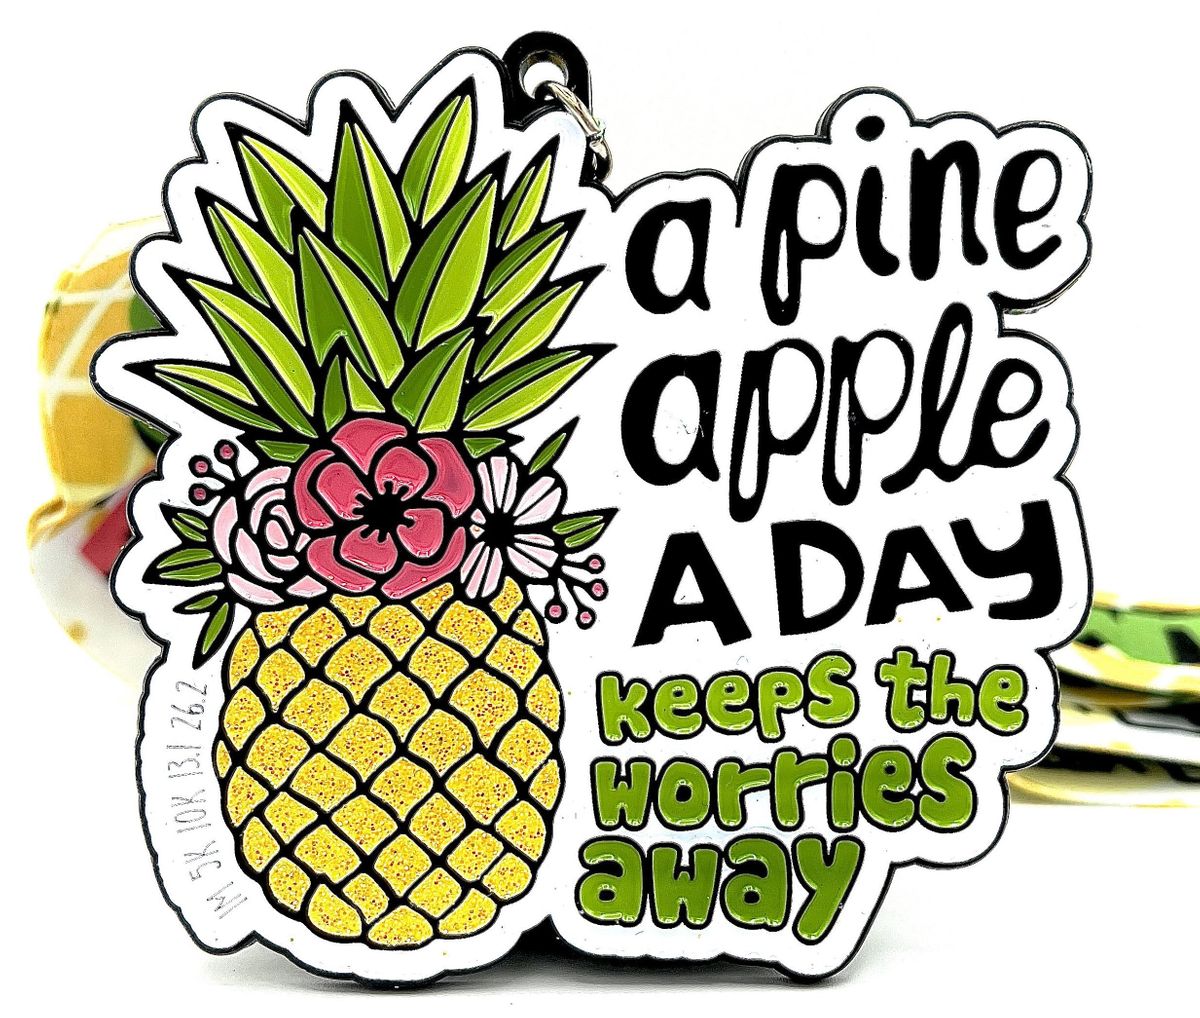 2021 Be a Pineapple 1M 5K 10K 13.1 26.2-Participate from Home. Save $5 now!